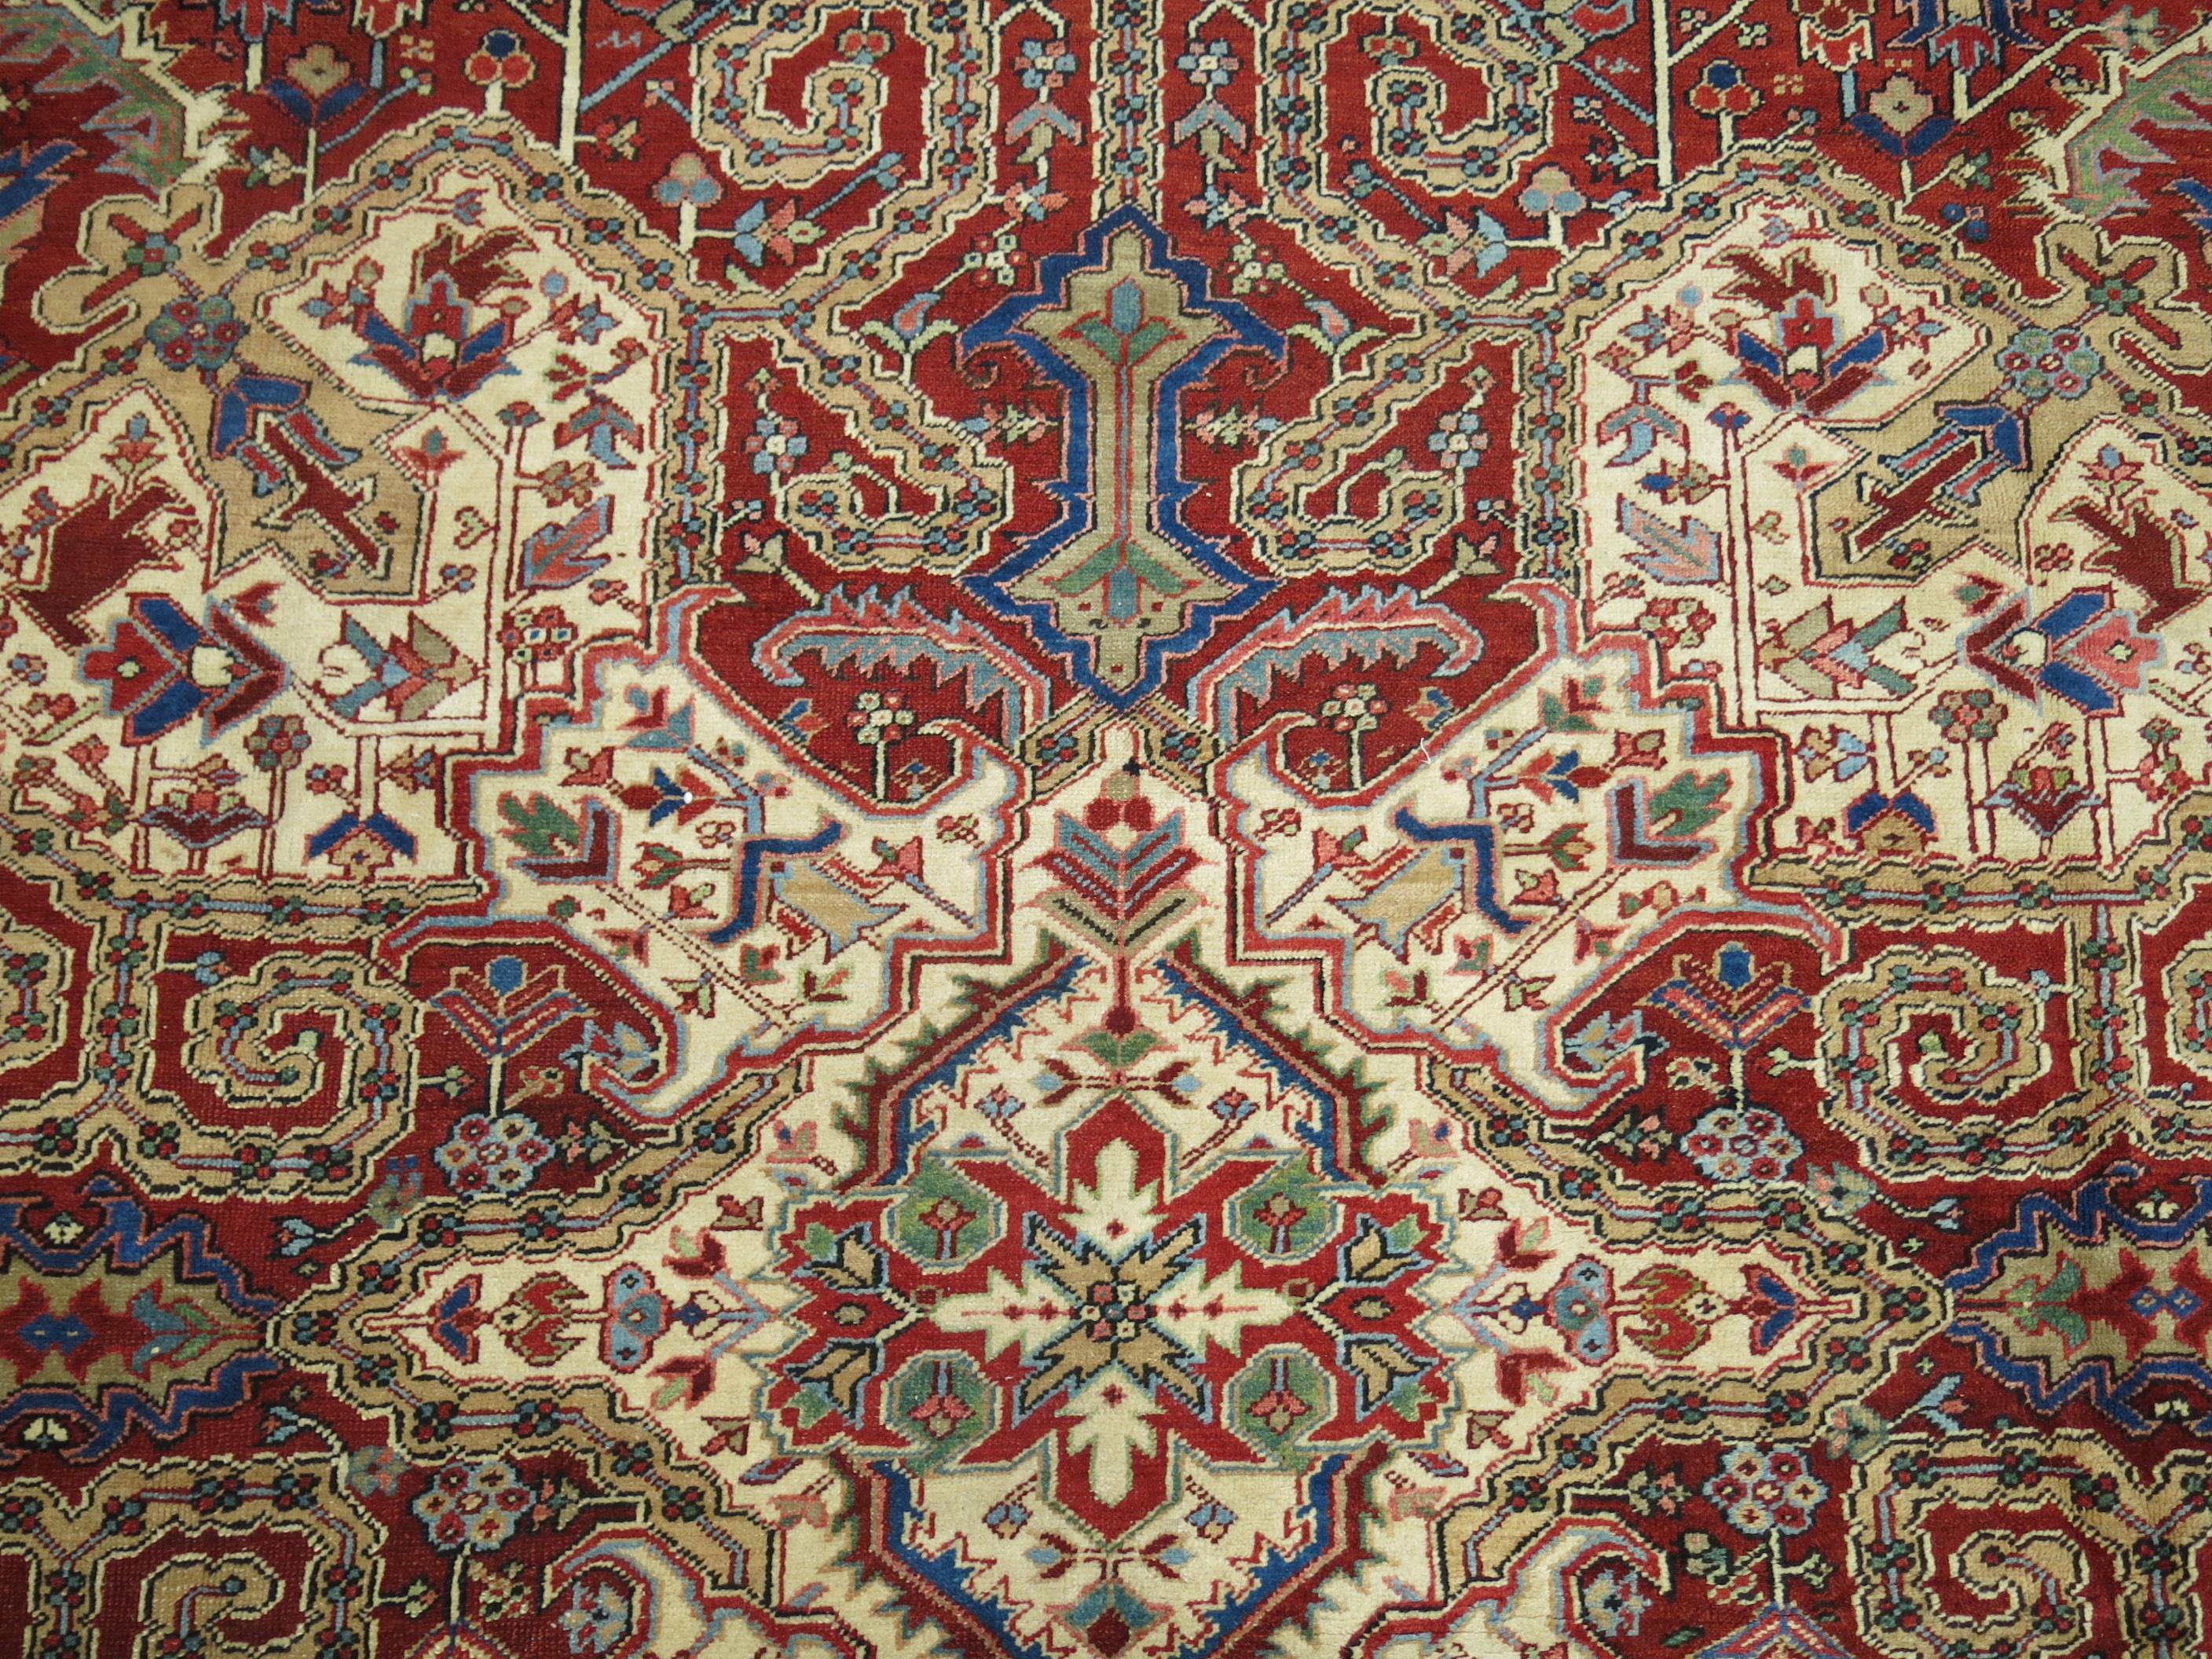 An early 20th century Persian Heriz rug Full Pile Condition featuring a dramatic medallion and large-scale design. Excellent Overall Condition.

11'9'' x 14'9''